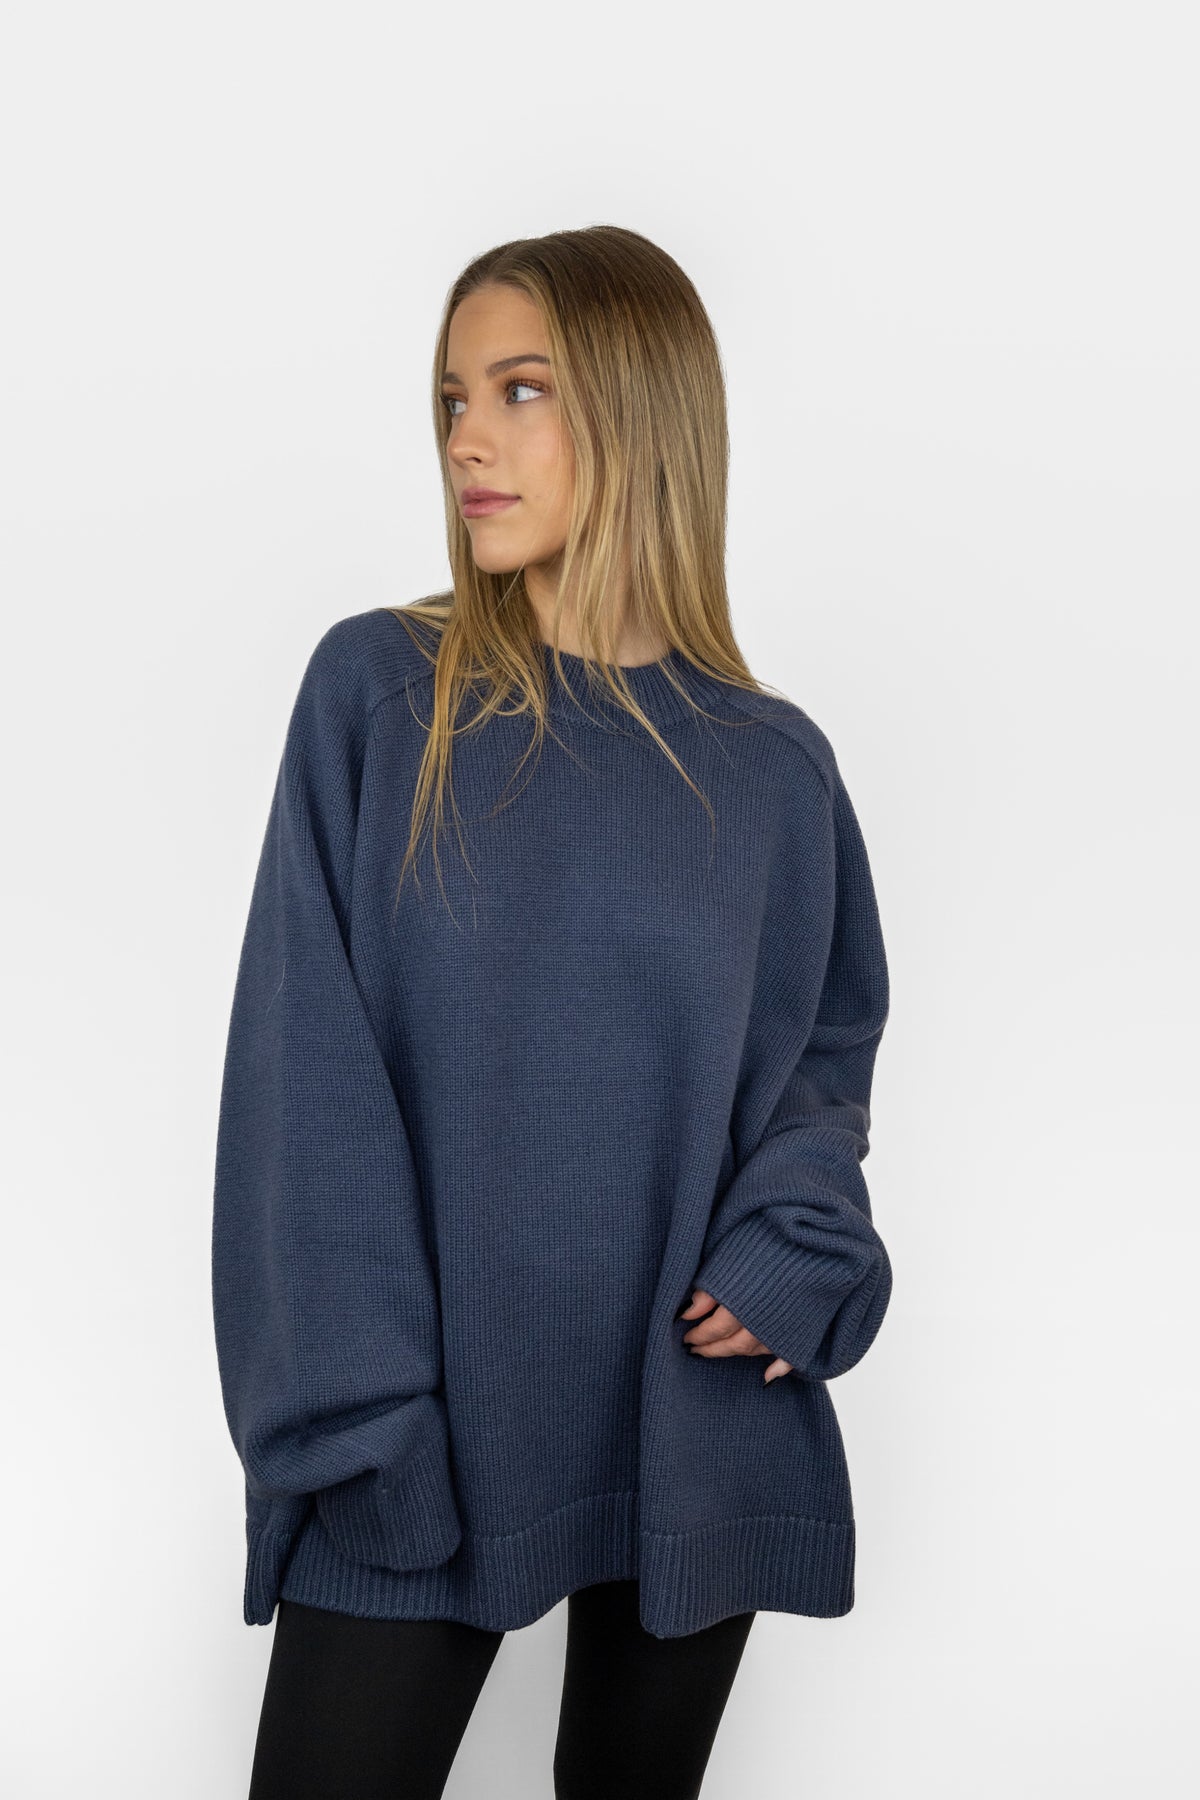 Tibi Cashmere Sweater Oversized Pullover navy